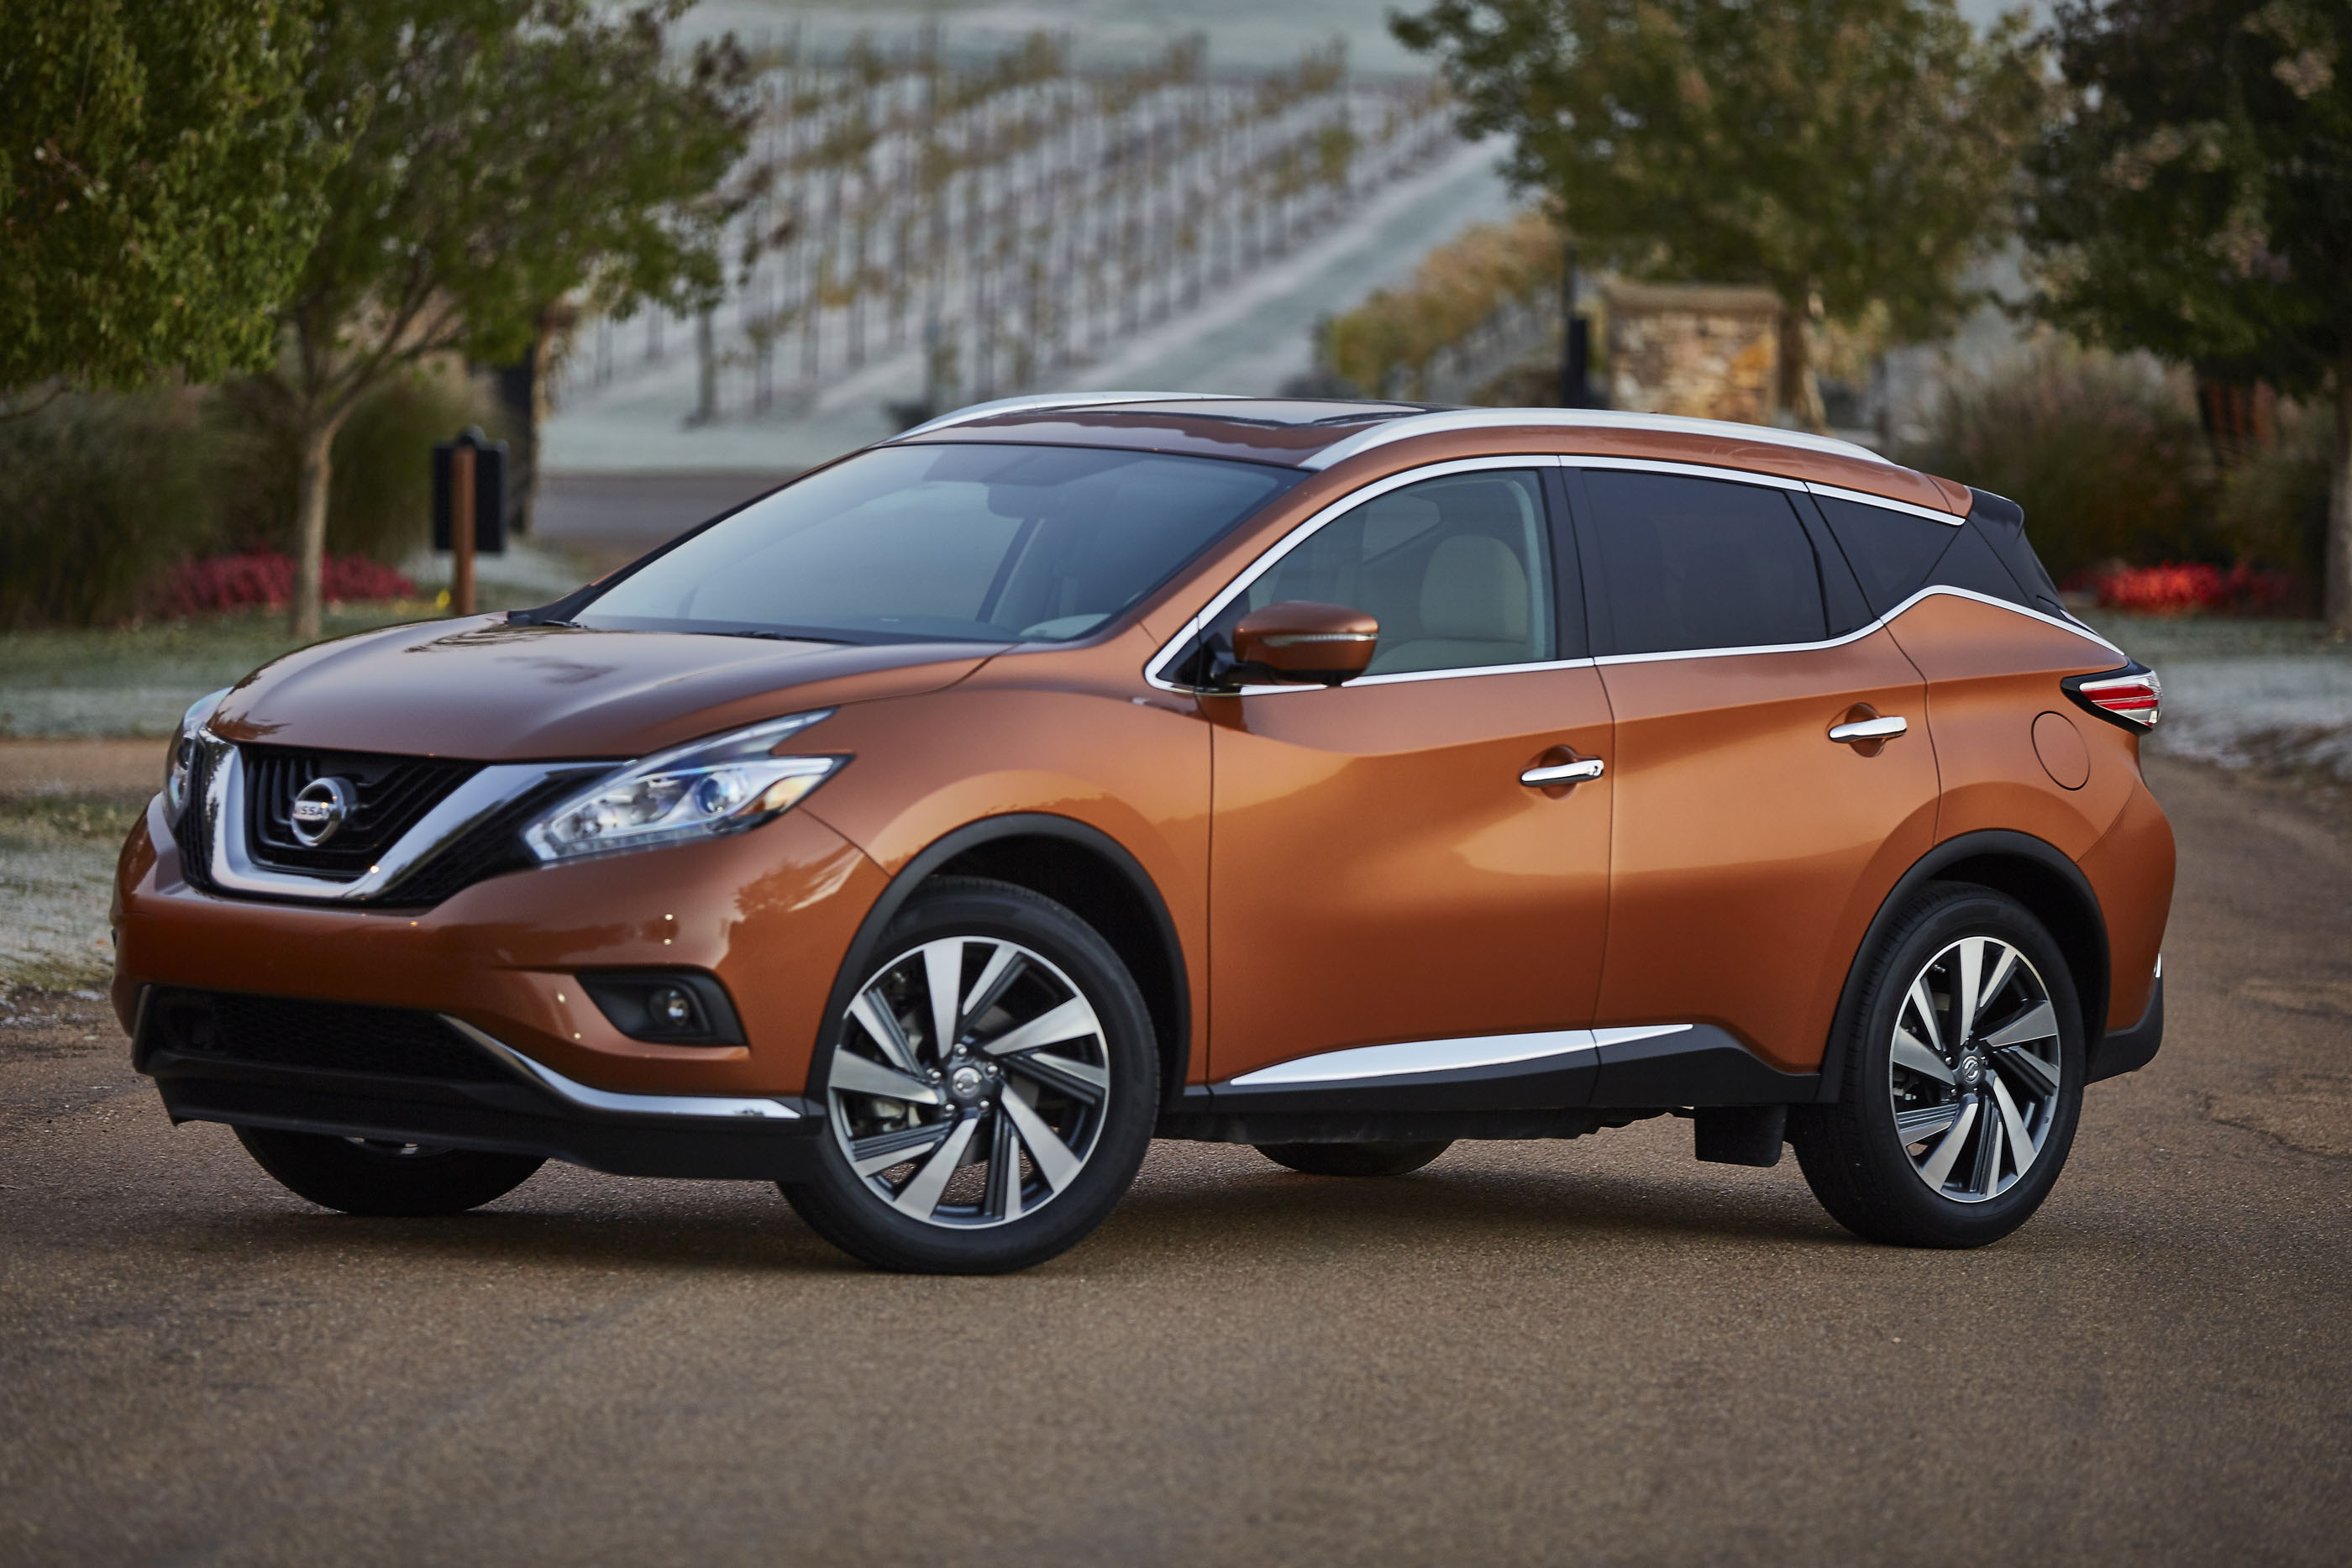 2017 Nissan Murano Safety Review and Crash Test Ratings - The Car Connection